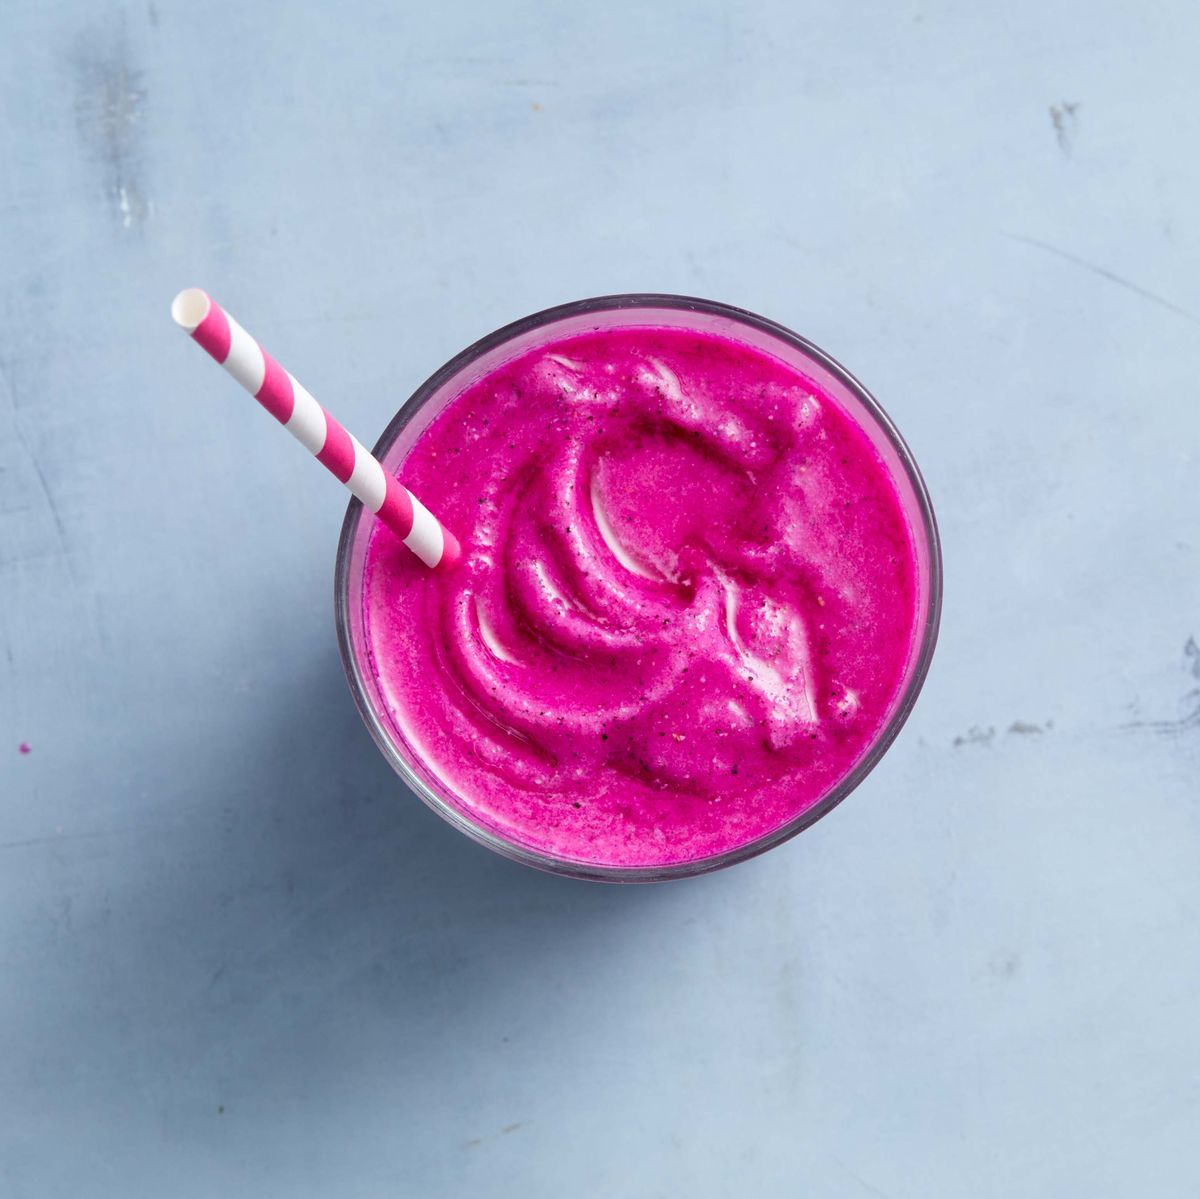 Dragon Fruit Smoothie - Know Your Produce